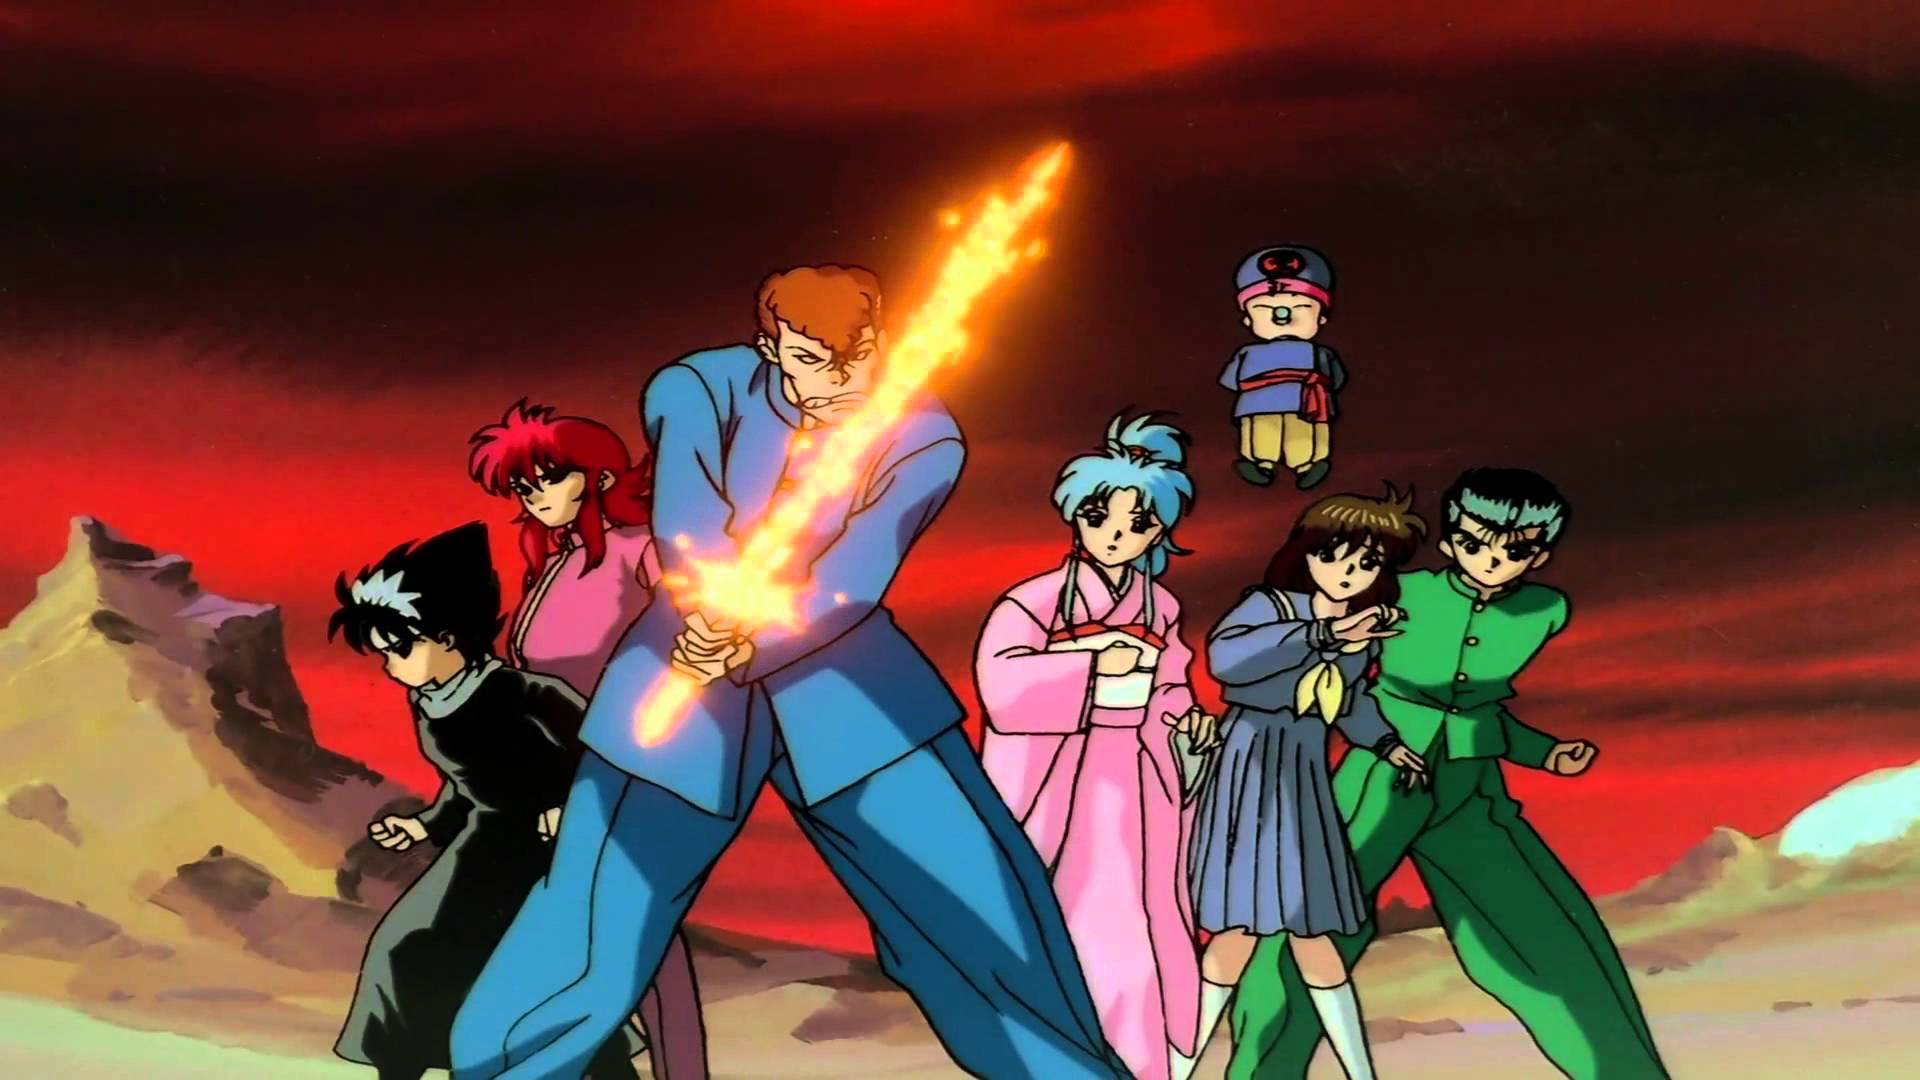 Yu Yu Hakusho Wallpapers Image Photos Pictures Backgrounds.